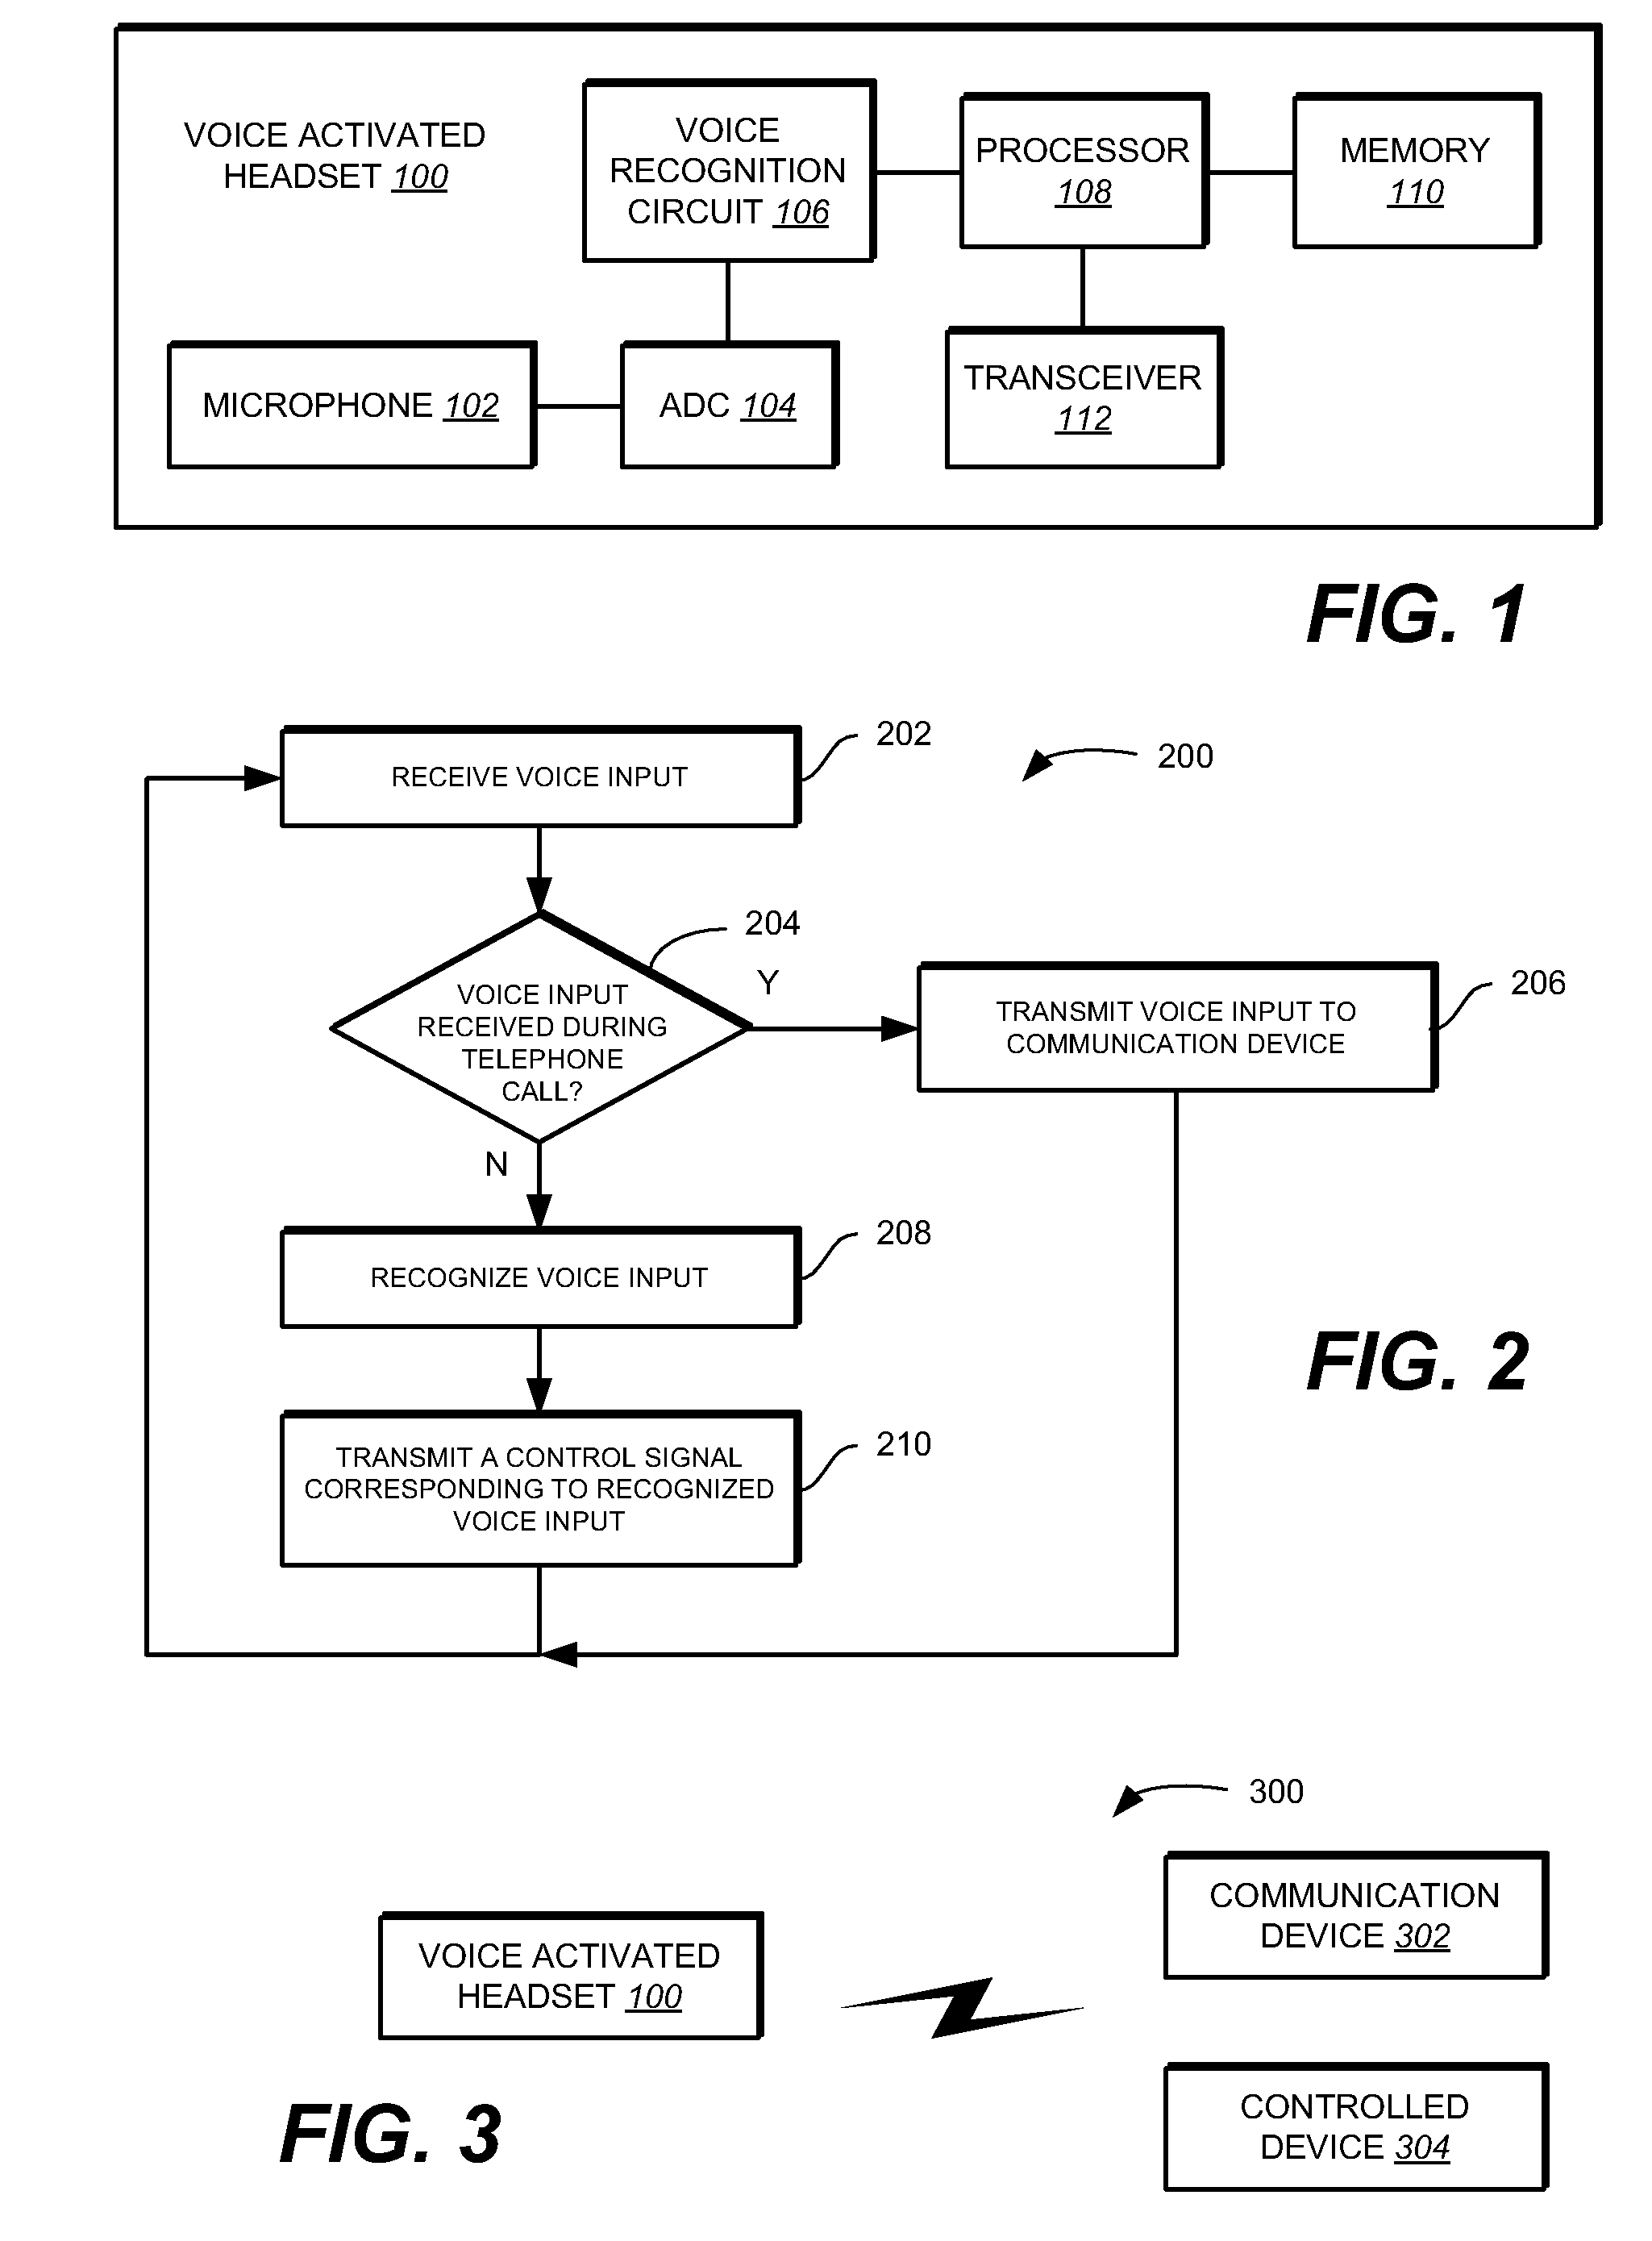 Method and apparatus for remote control of devices through a wireless headset using voice activation